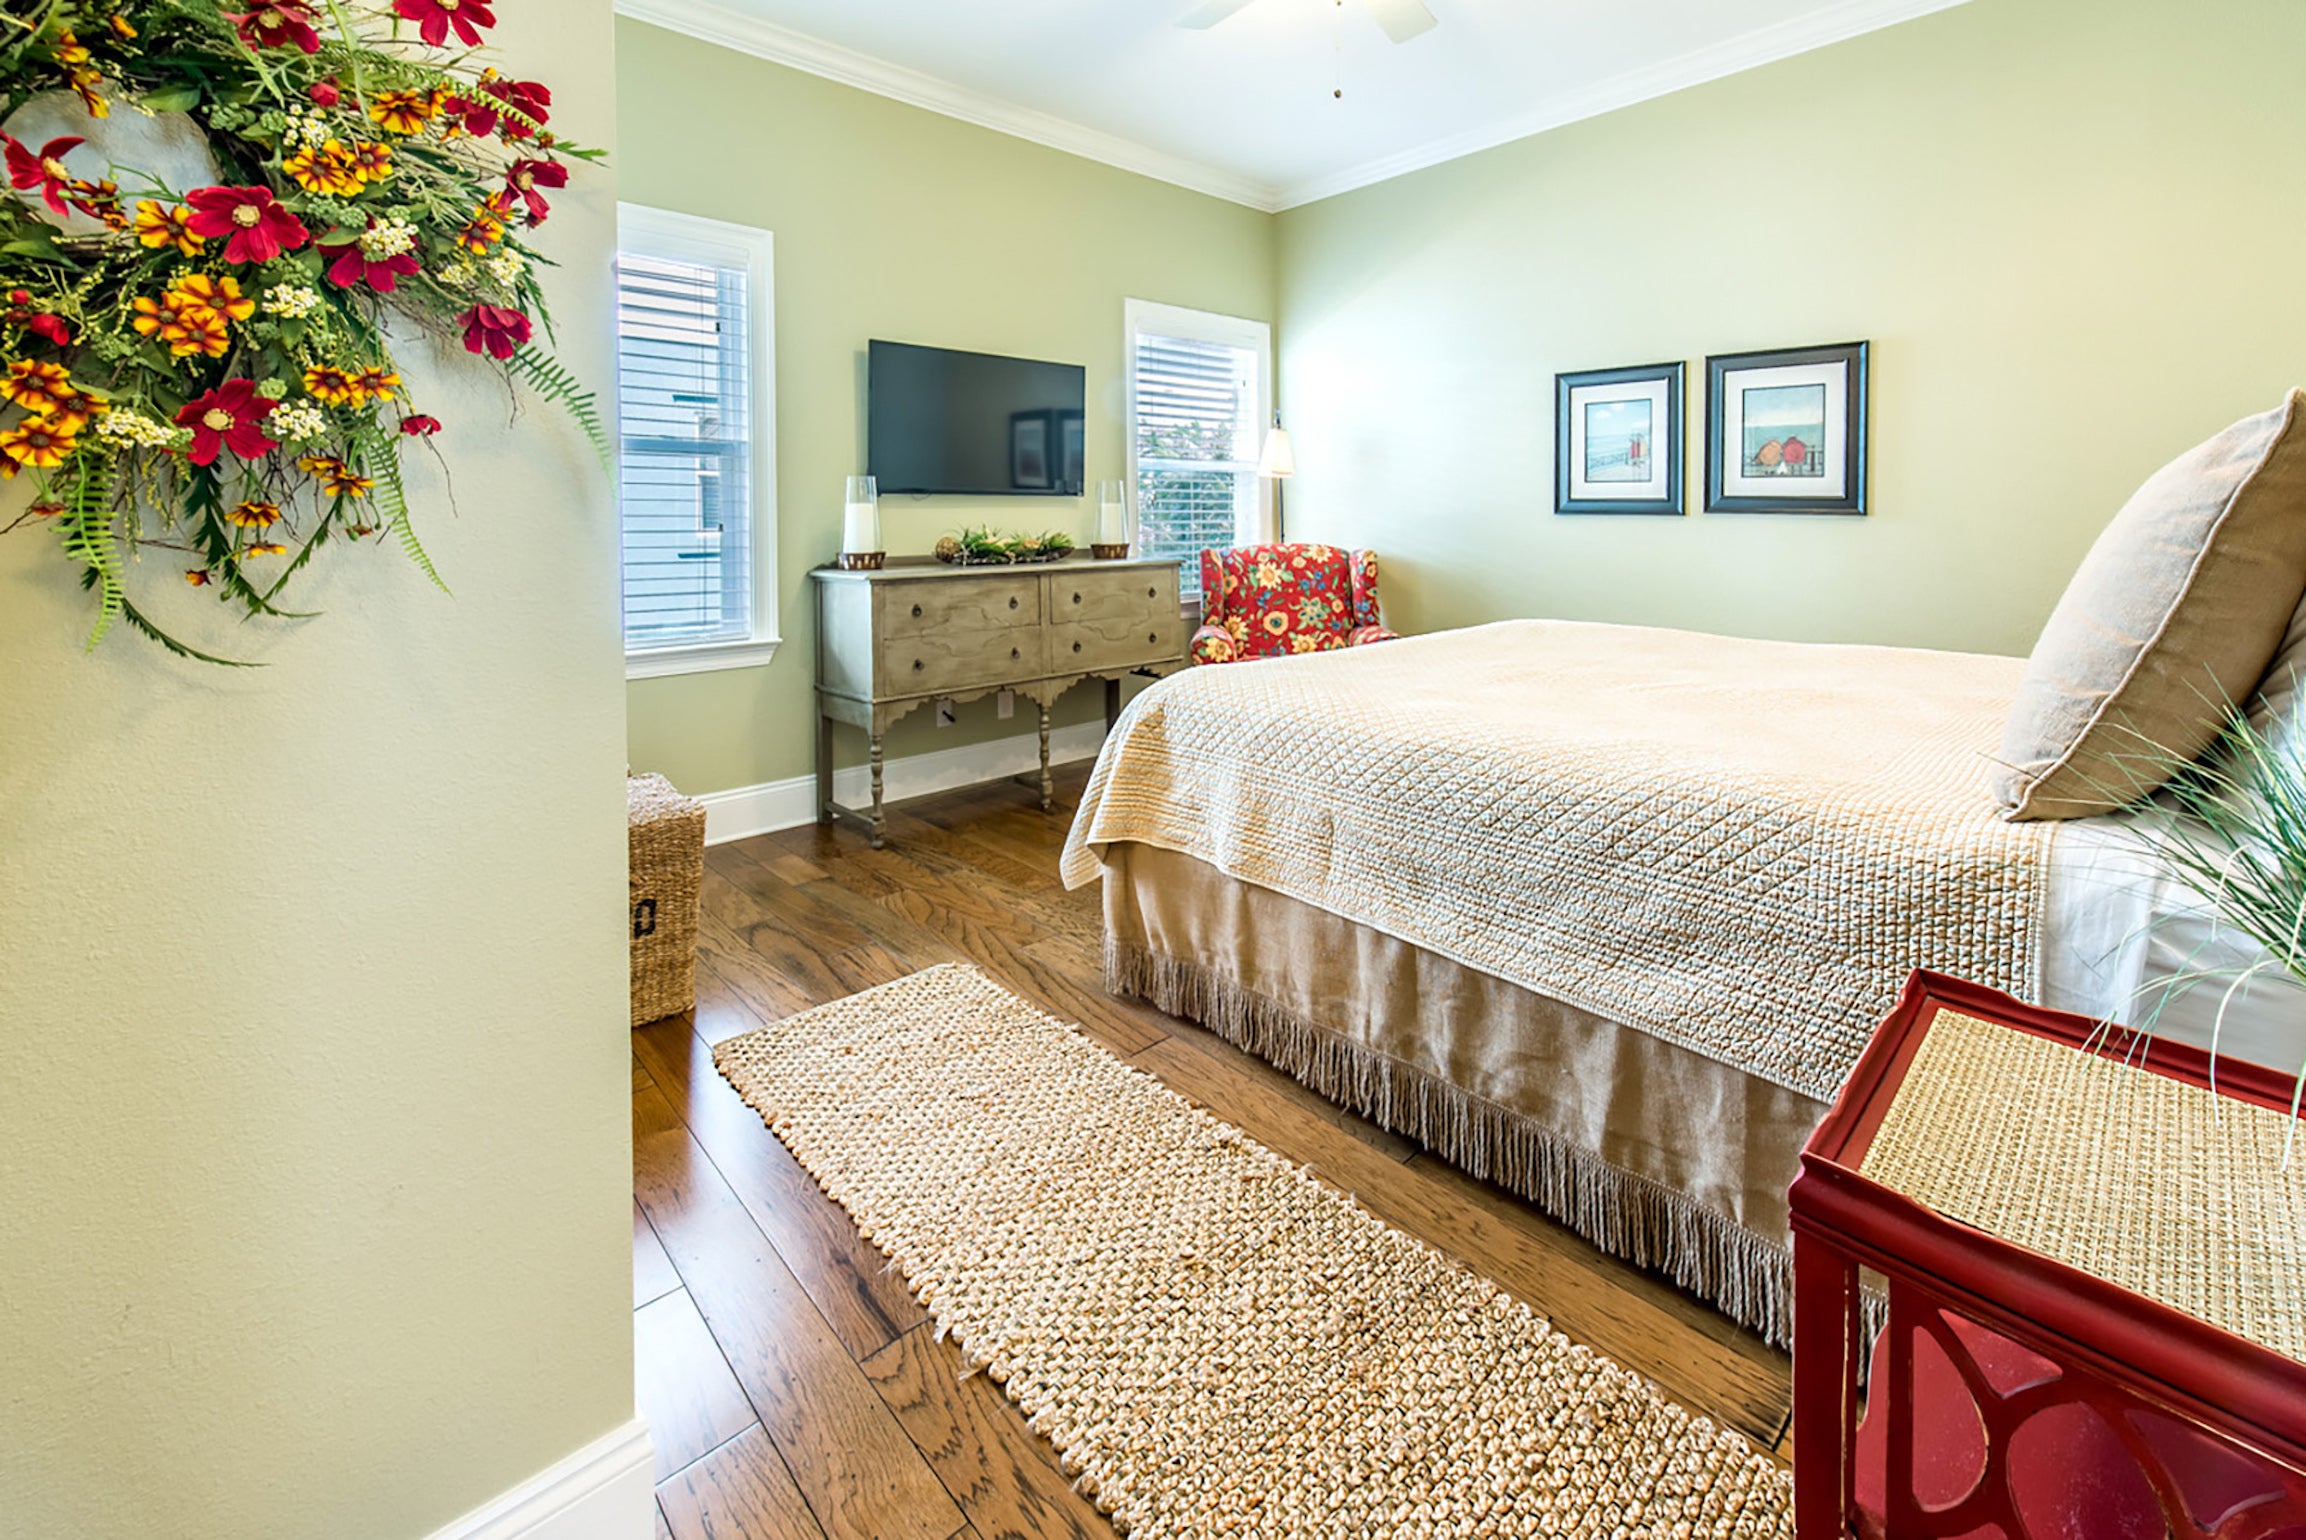 What a beautiful relaxing 1st floor Master bedroom!